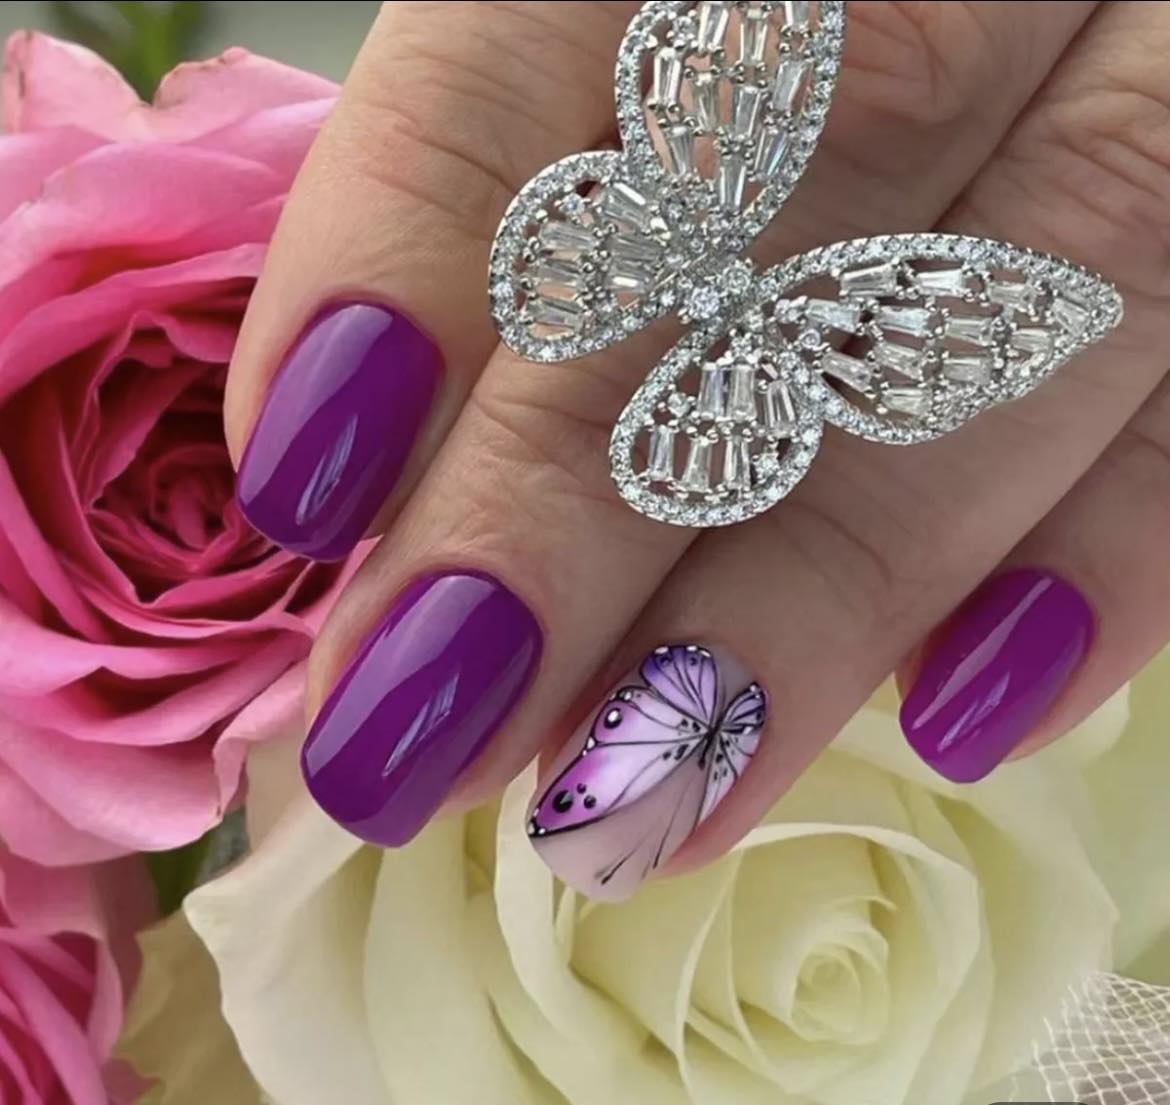 Medium Length Squoval Press on Nails. Dark Magenta with Butterflies. Durable Acrylic Press on Nails. Easy and quick to apply. Great for those special occasions, parties or add an edge to any outfit. Gorgeous, flattering and you can re-use them again and again.